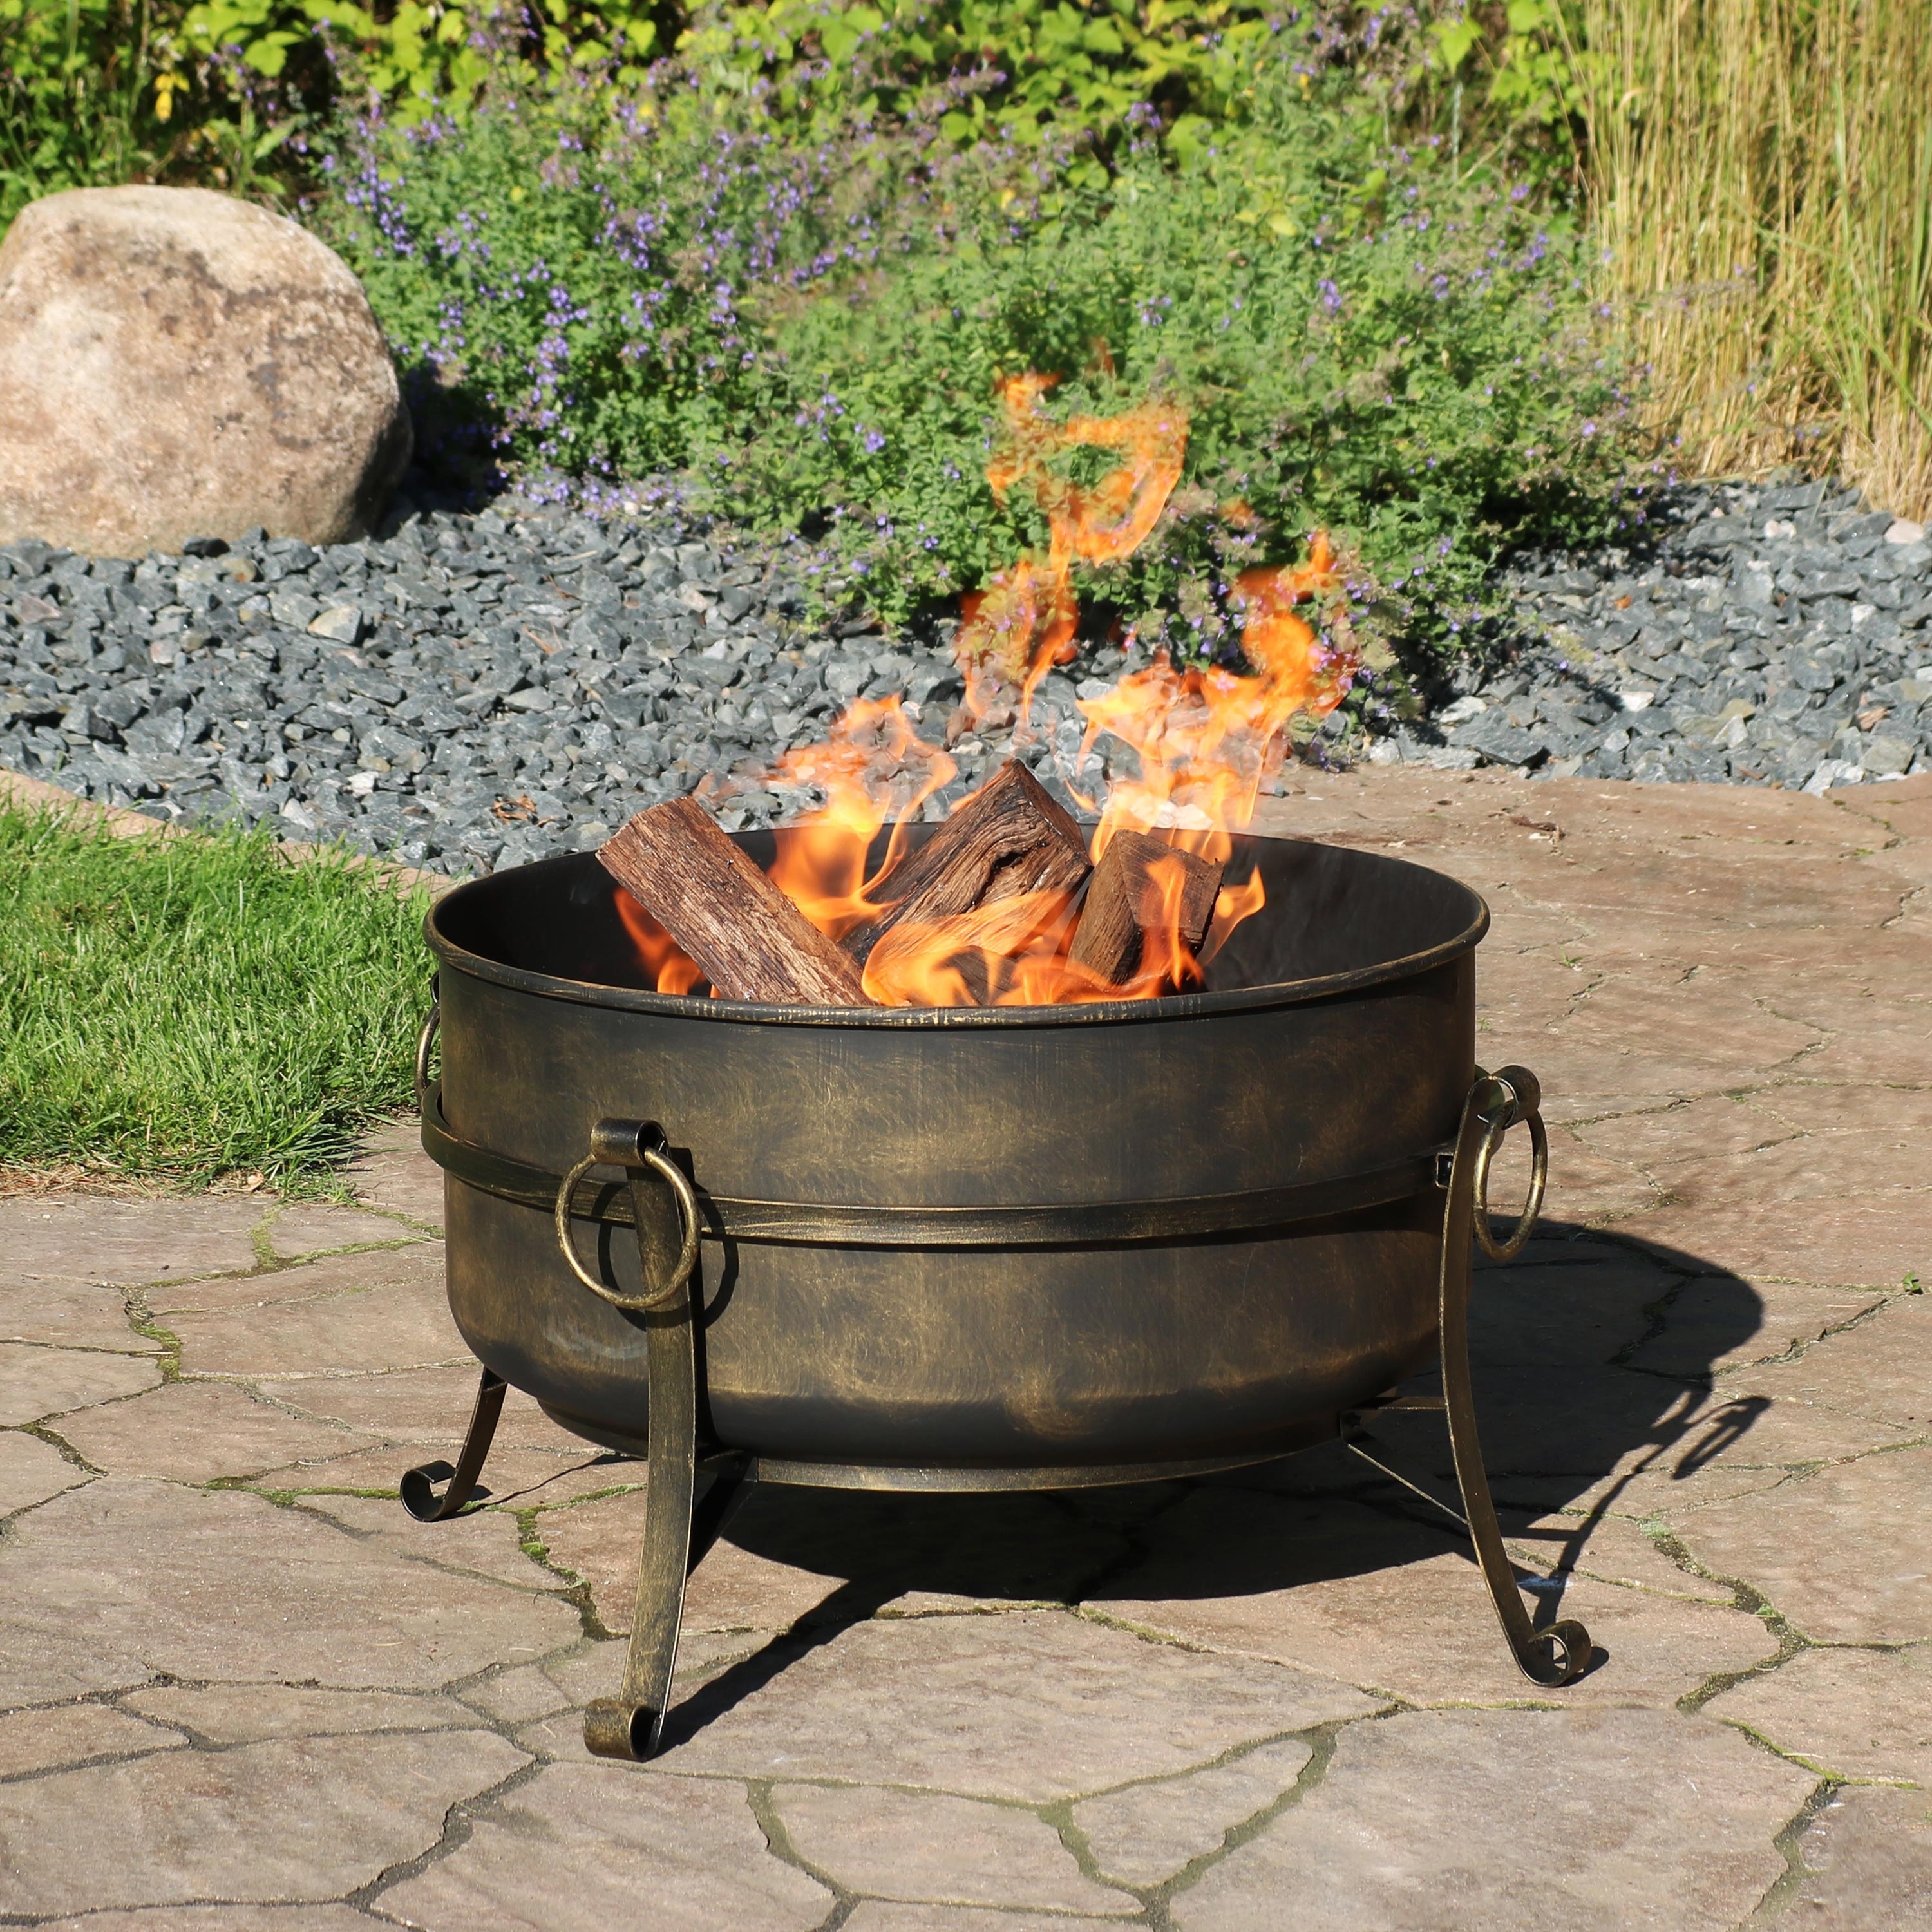 Catalina Creations 100/% Solid Copper Fire Pit with Log Grate Lift Tool Spark Screen